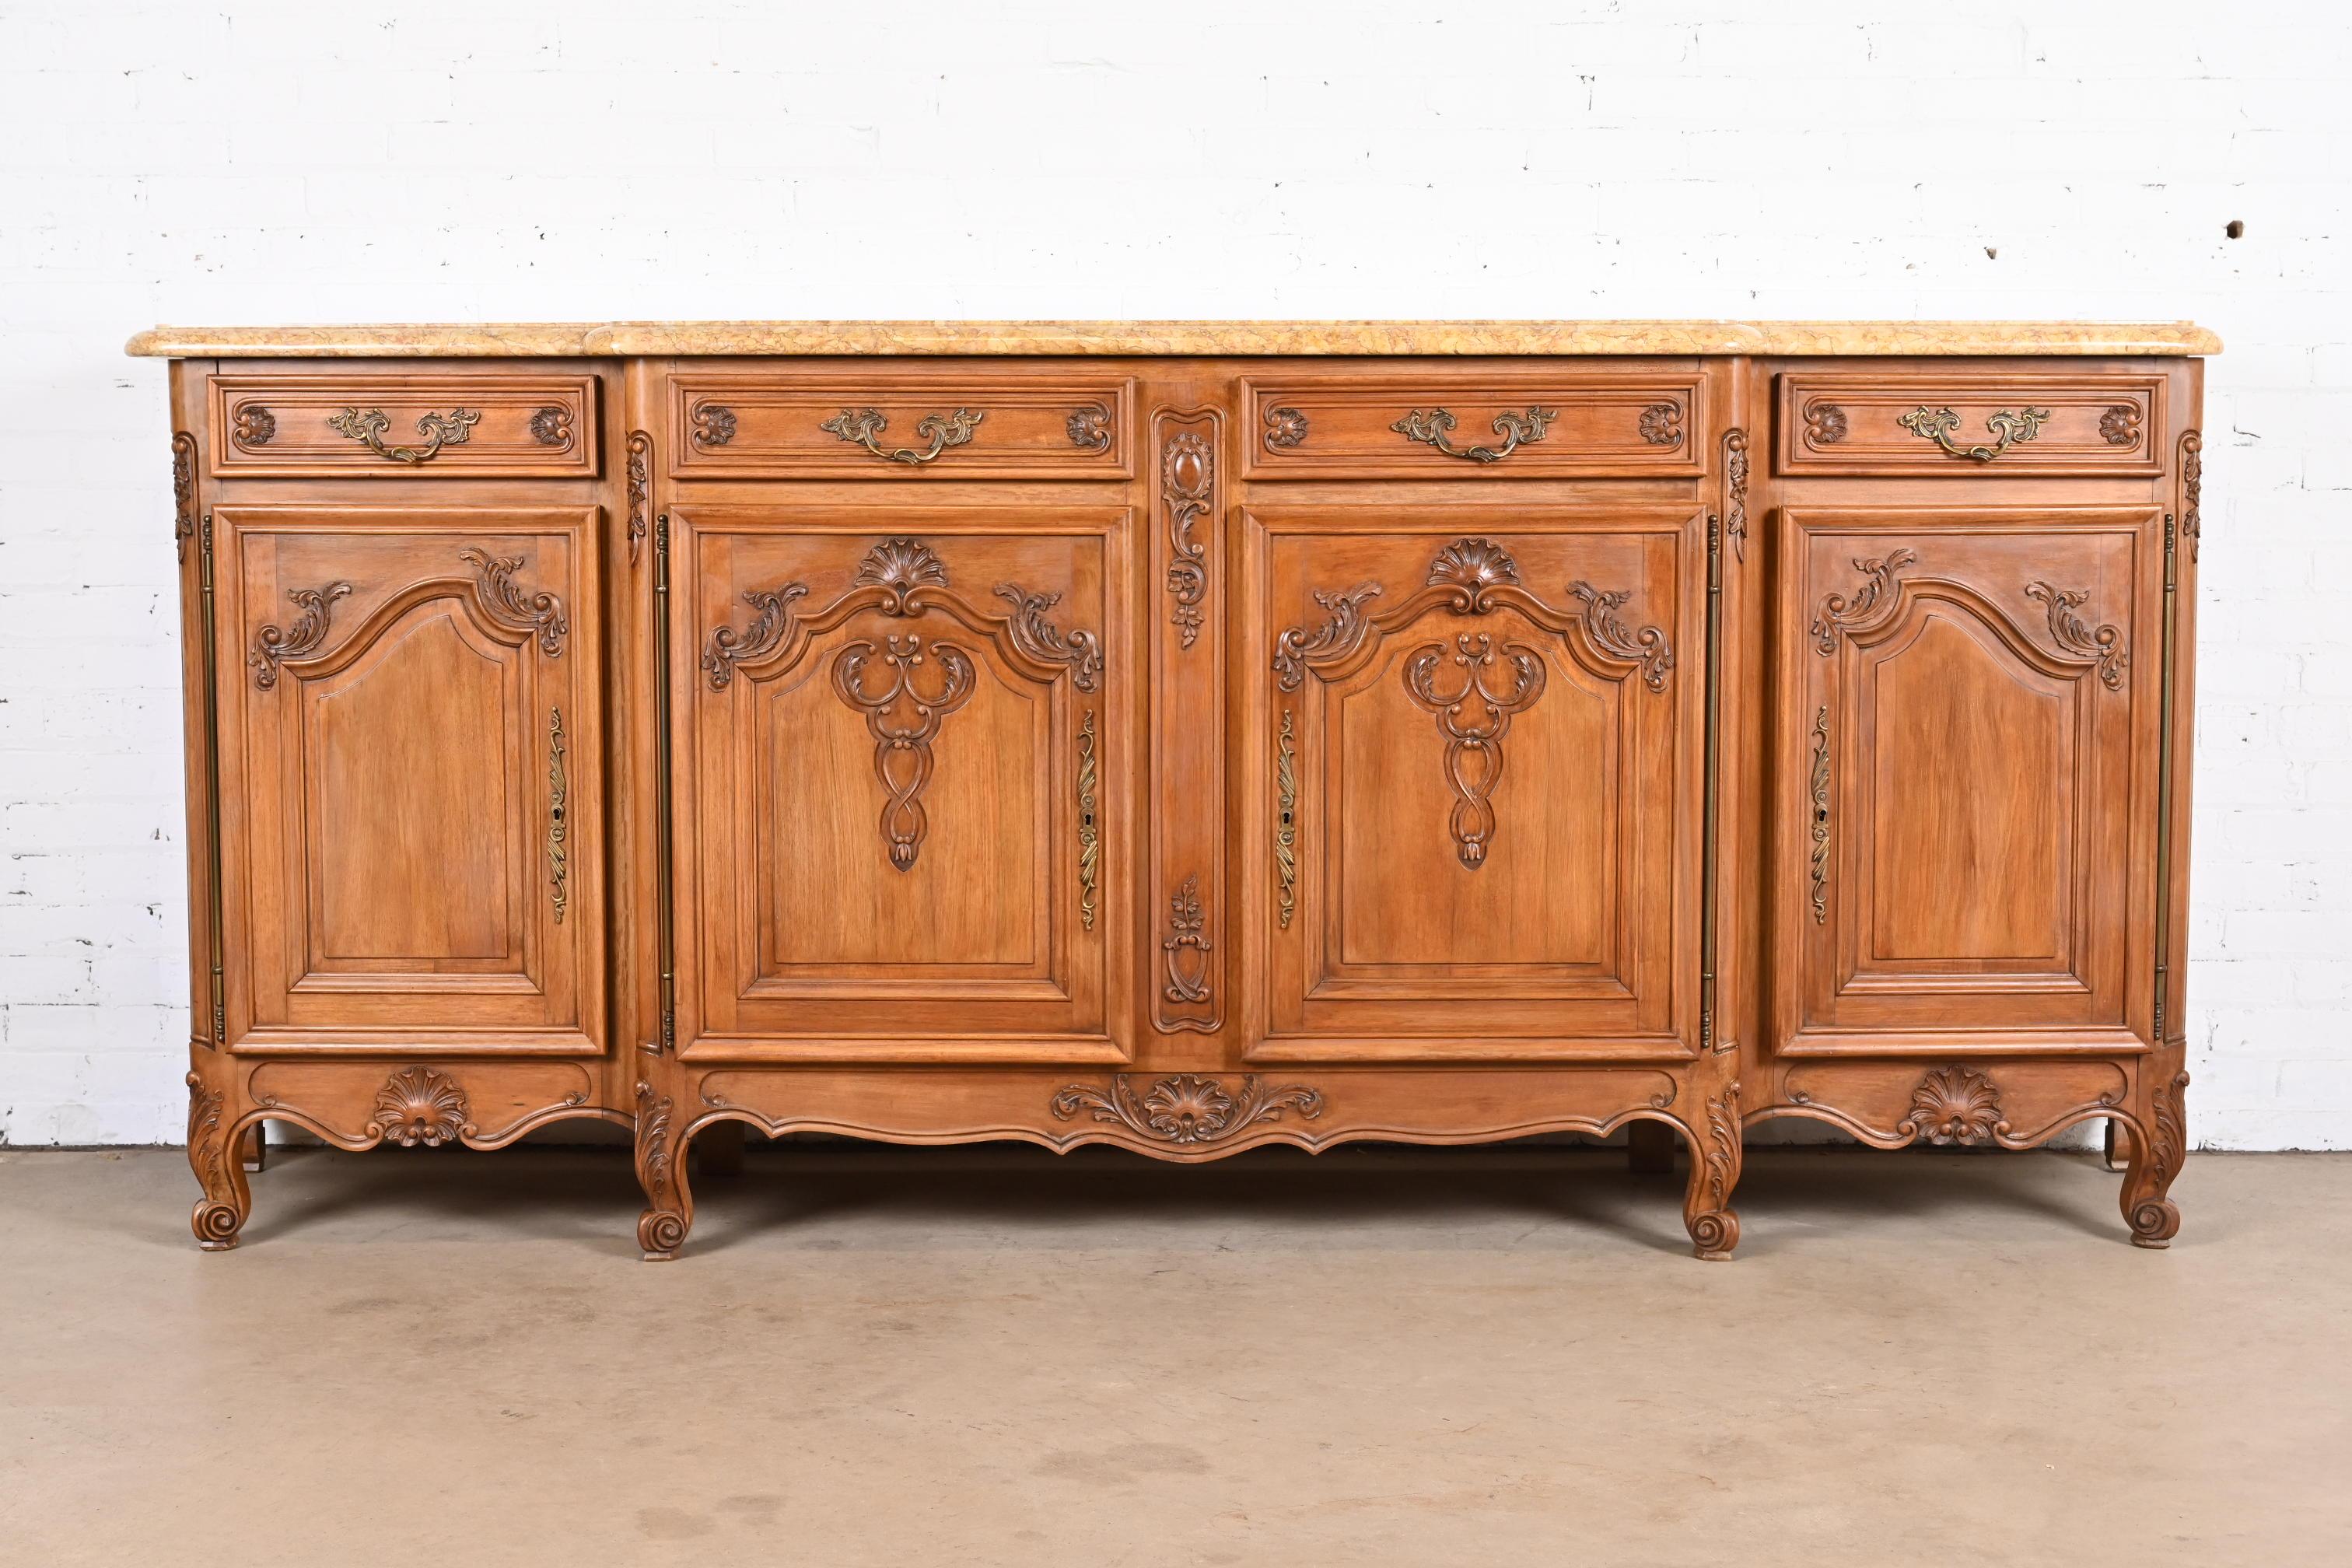 An outstanding French Provincial Louis XV style monumental sideboard, credenza, or bar cabinet

France, early 20th century

Carved walnut, with thick beveled marble top and original brass hardware.

Measures: 103.75